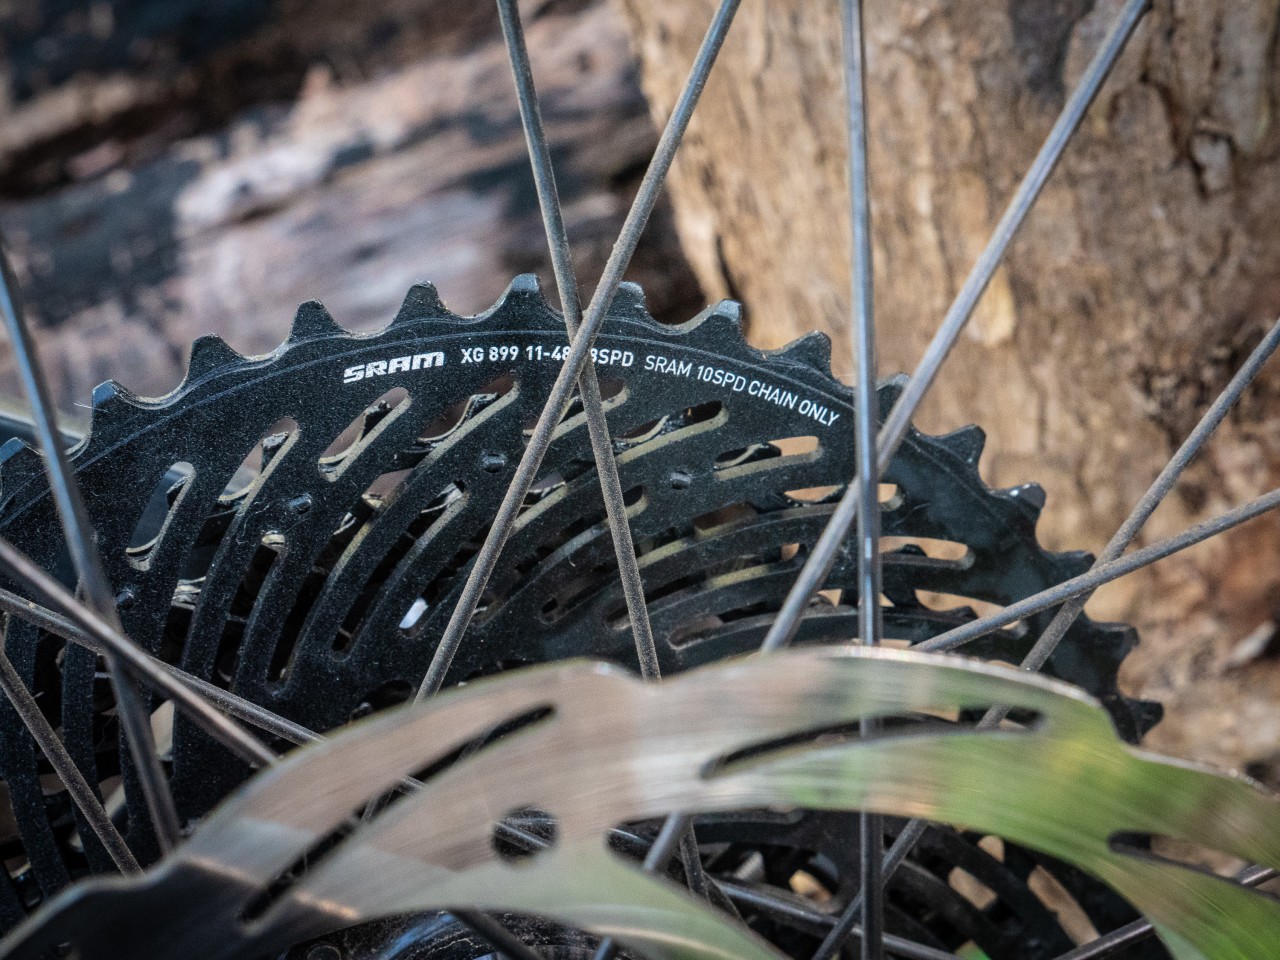 This is a $429 rear cassette, made from case-hardened tool steel specifically to take